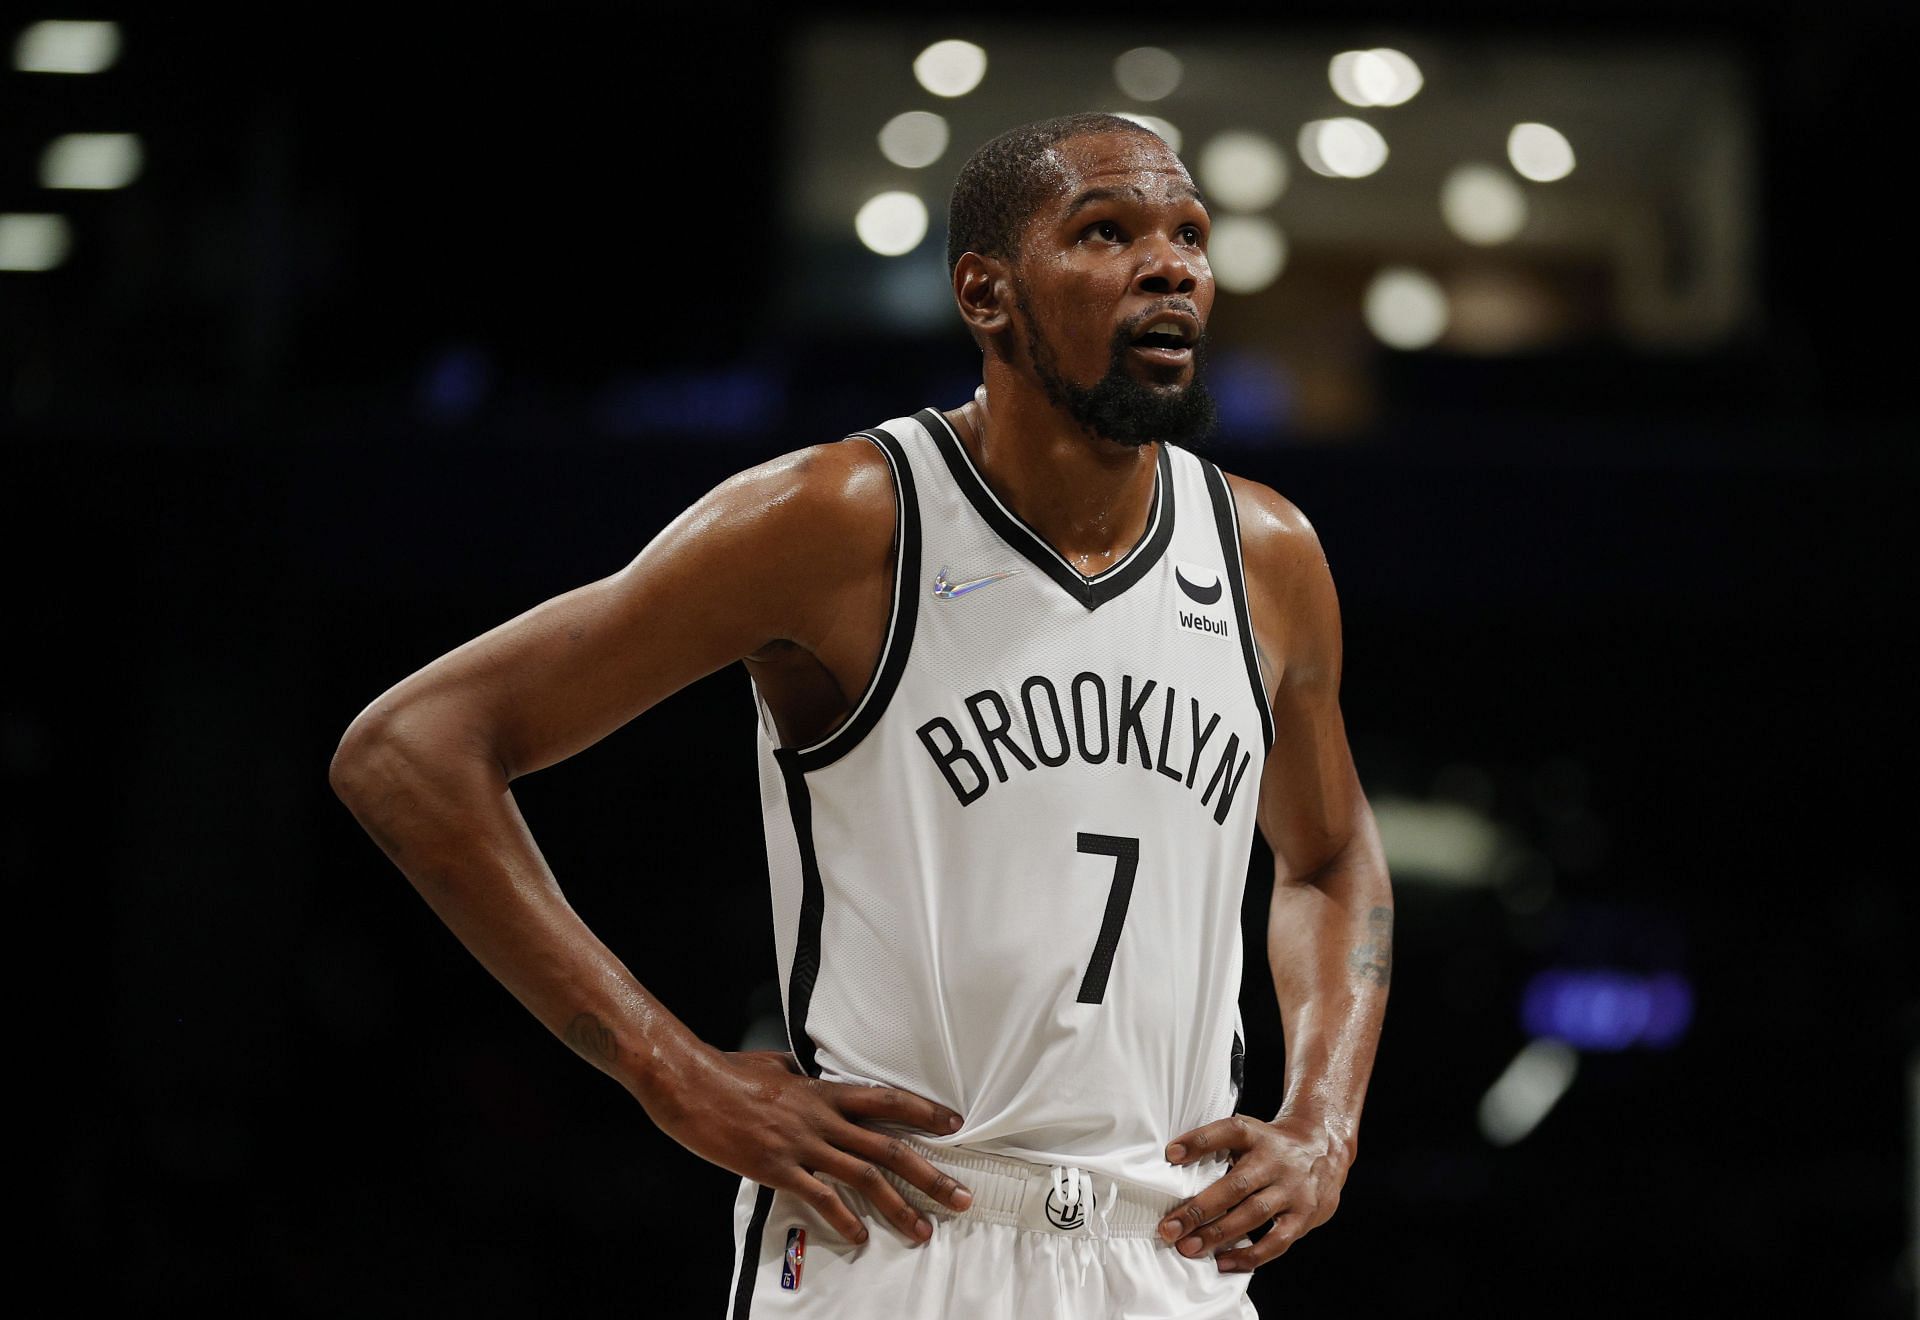 Kevin Durant of the Brooklyn Nets in the 2021 NBA preseason